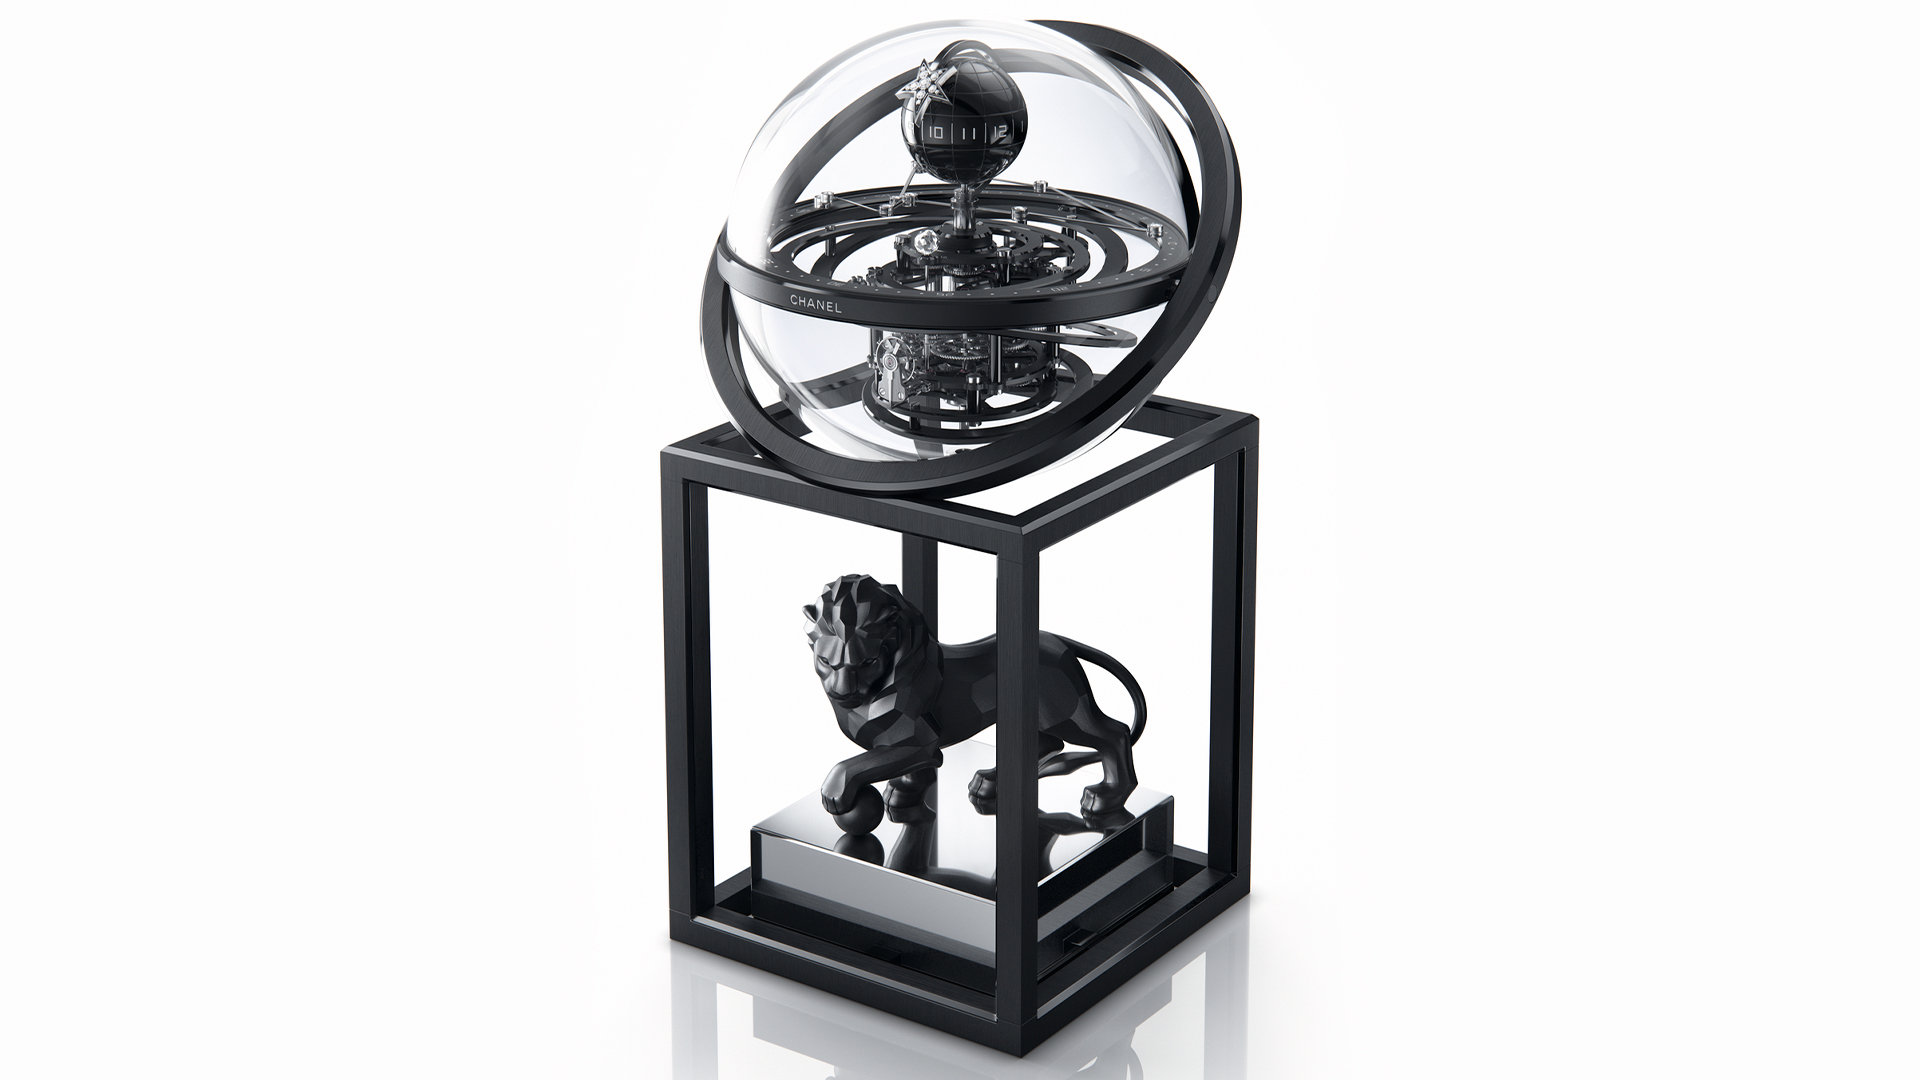 Chanel Introduces the Lion Astroclock